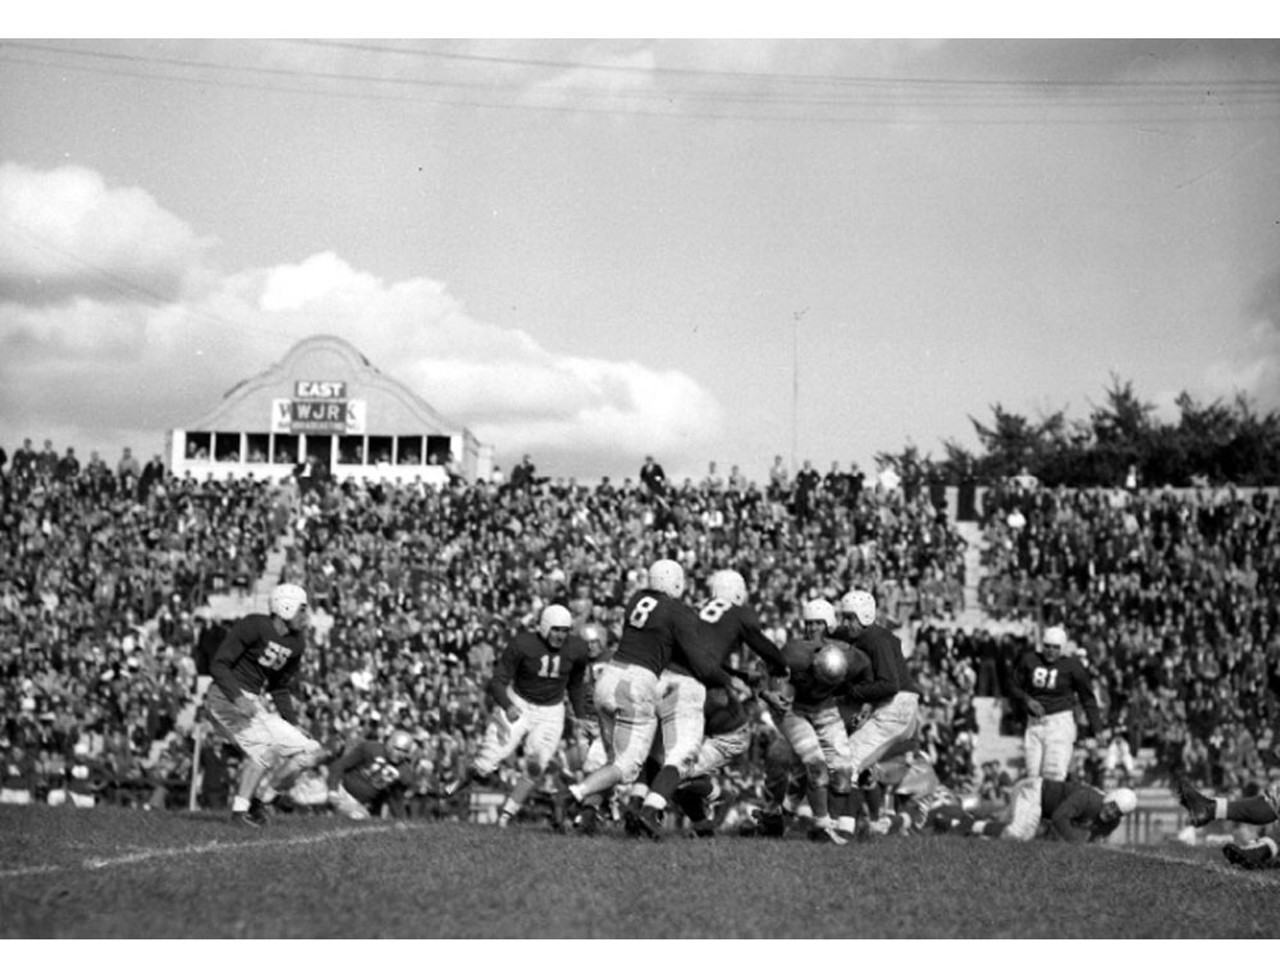 A 1939 game against the Cardinals.